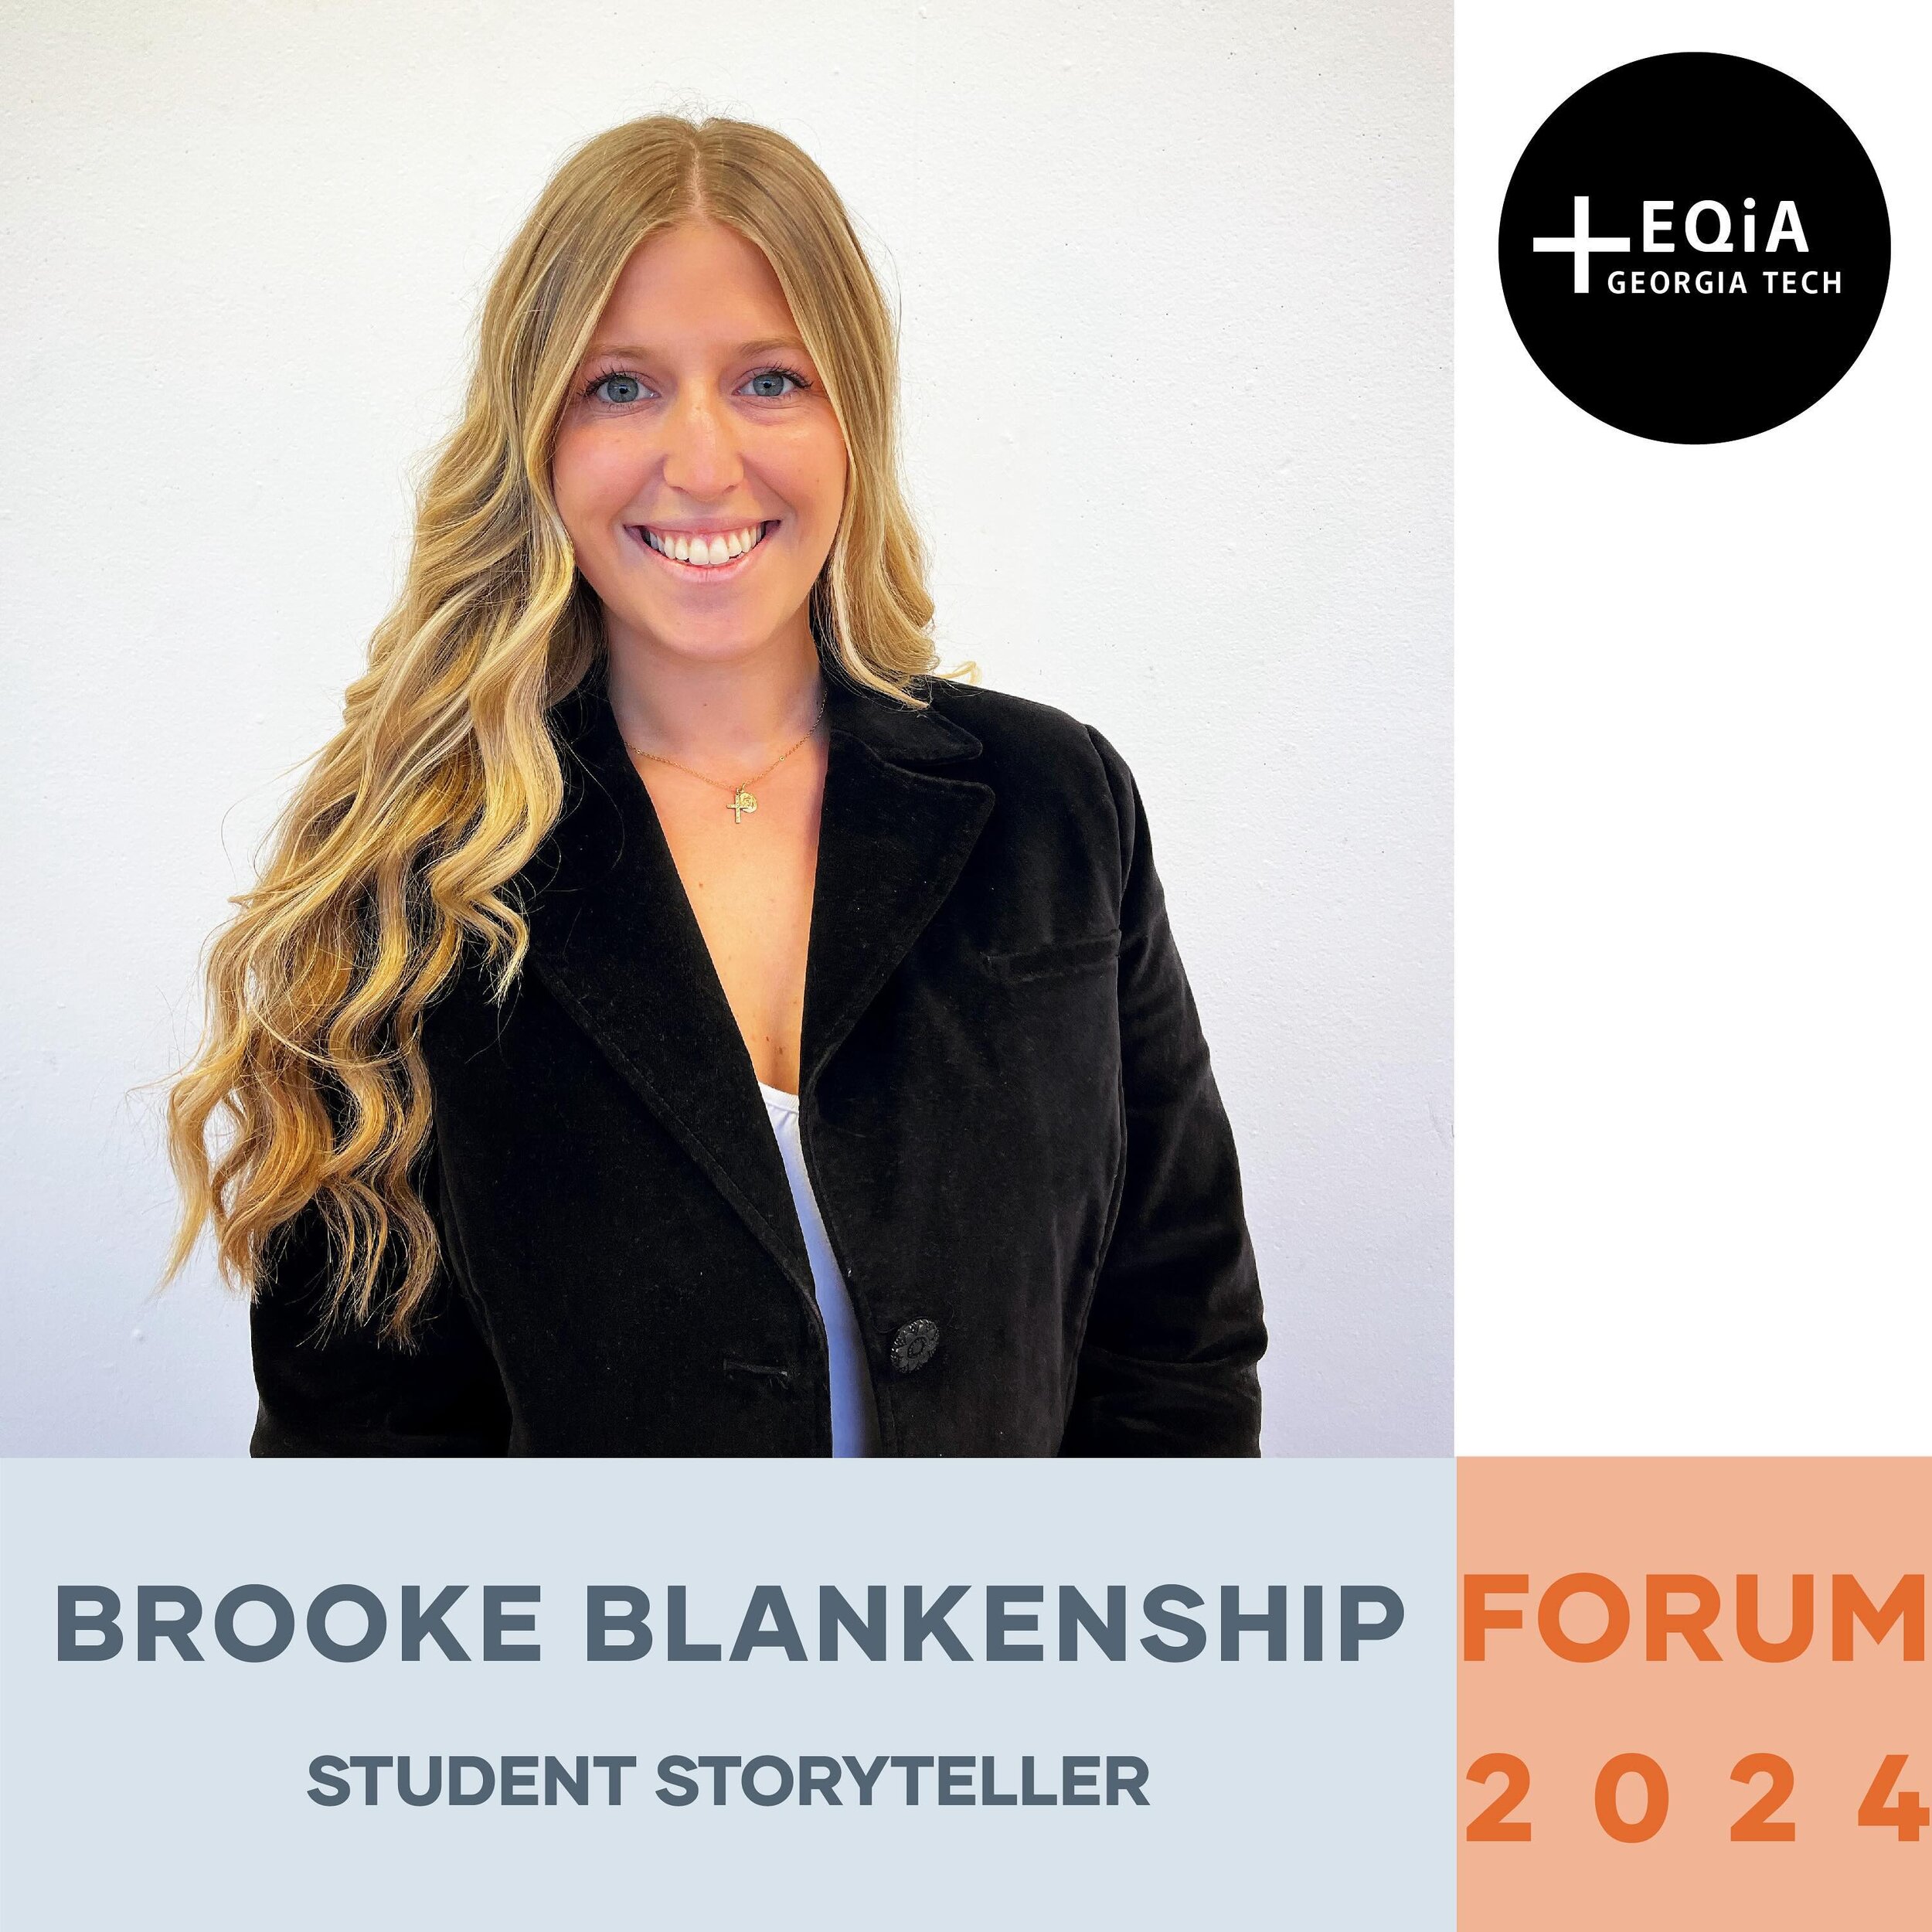 ⭐️ STUDENT STORYTELLER ⭐️ 

Originally from Jackson, Missouri, Brooke will graduate from the Georgia Institute of Technology&rsquo;s Master of Architecture program in May of 2024. She previously earned her Bachelor of Science in Interior Architecture